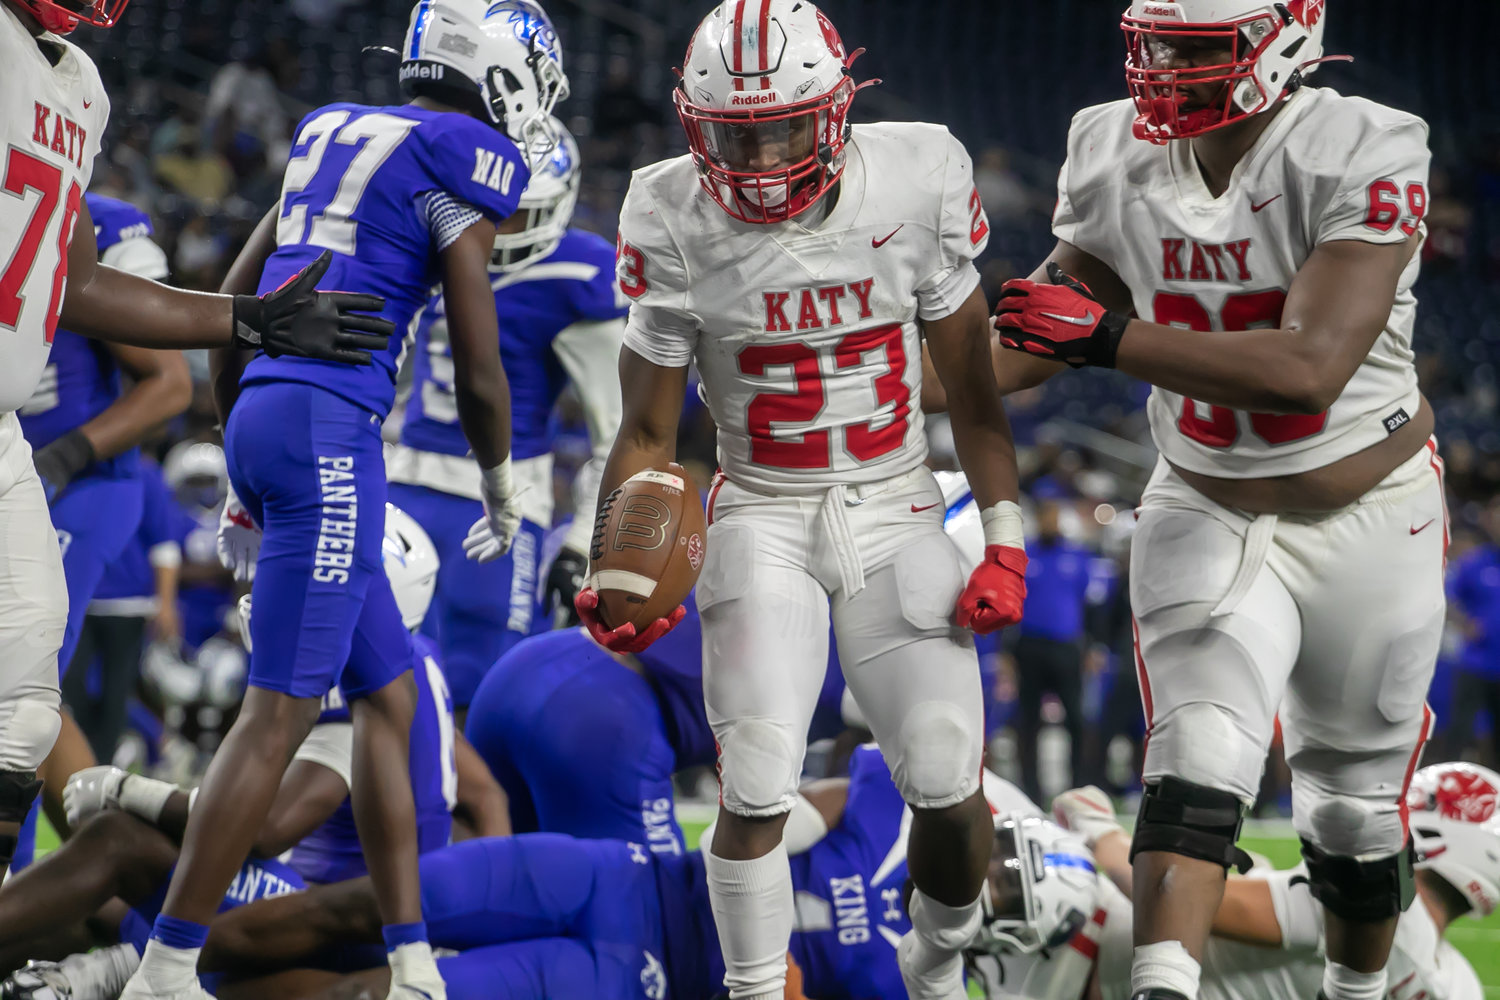 Seth Davis scores a touchdown during a Class 6A-Division II Region III Final between Katy and C.E. King at NRG Stadium.